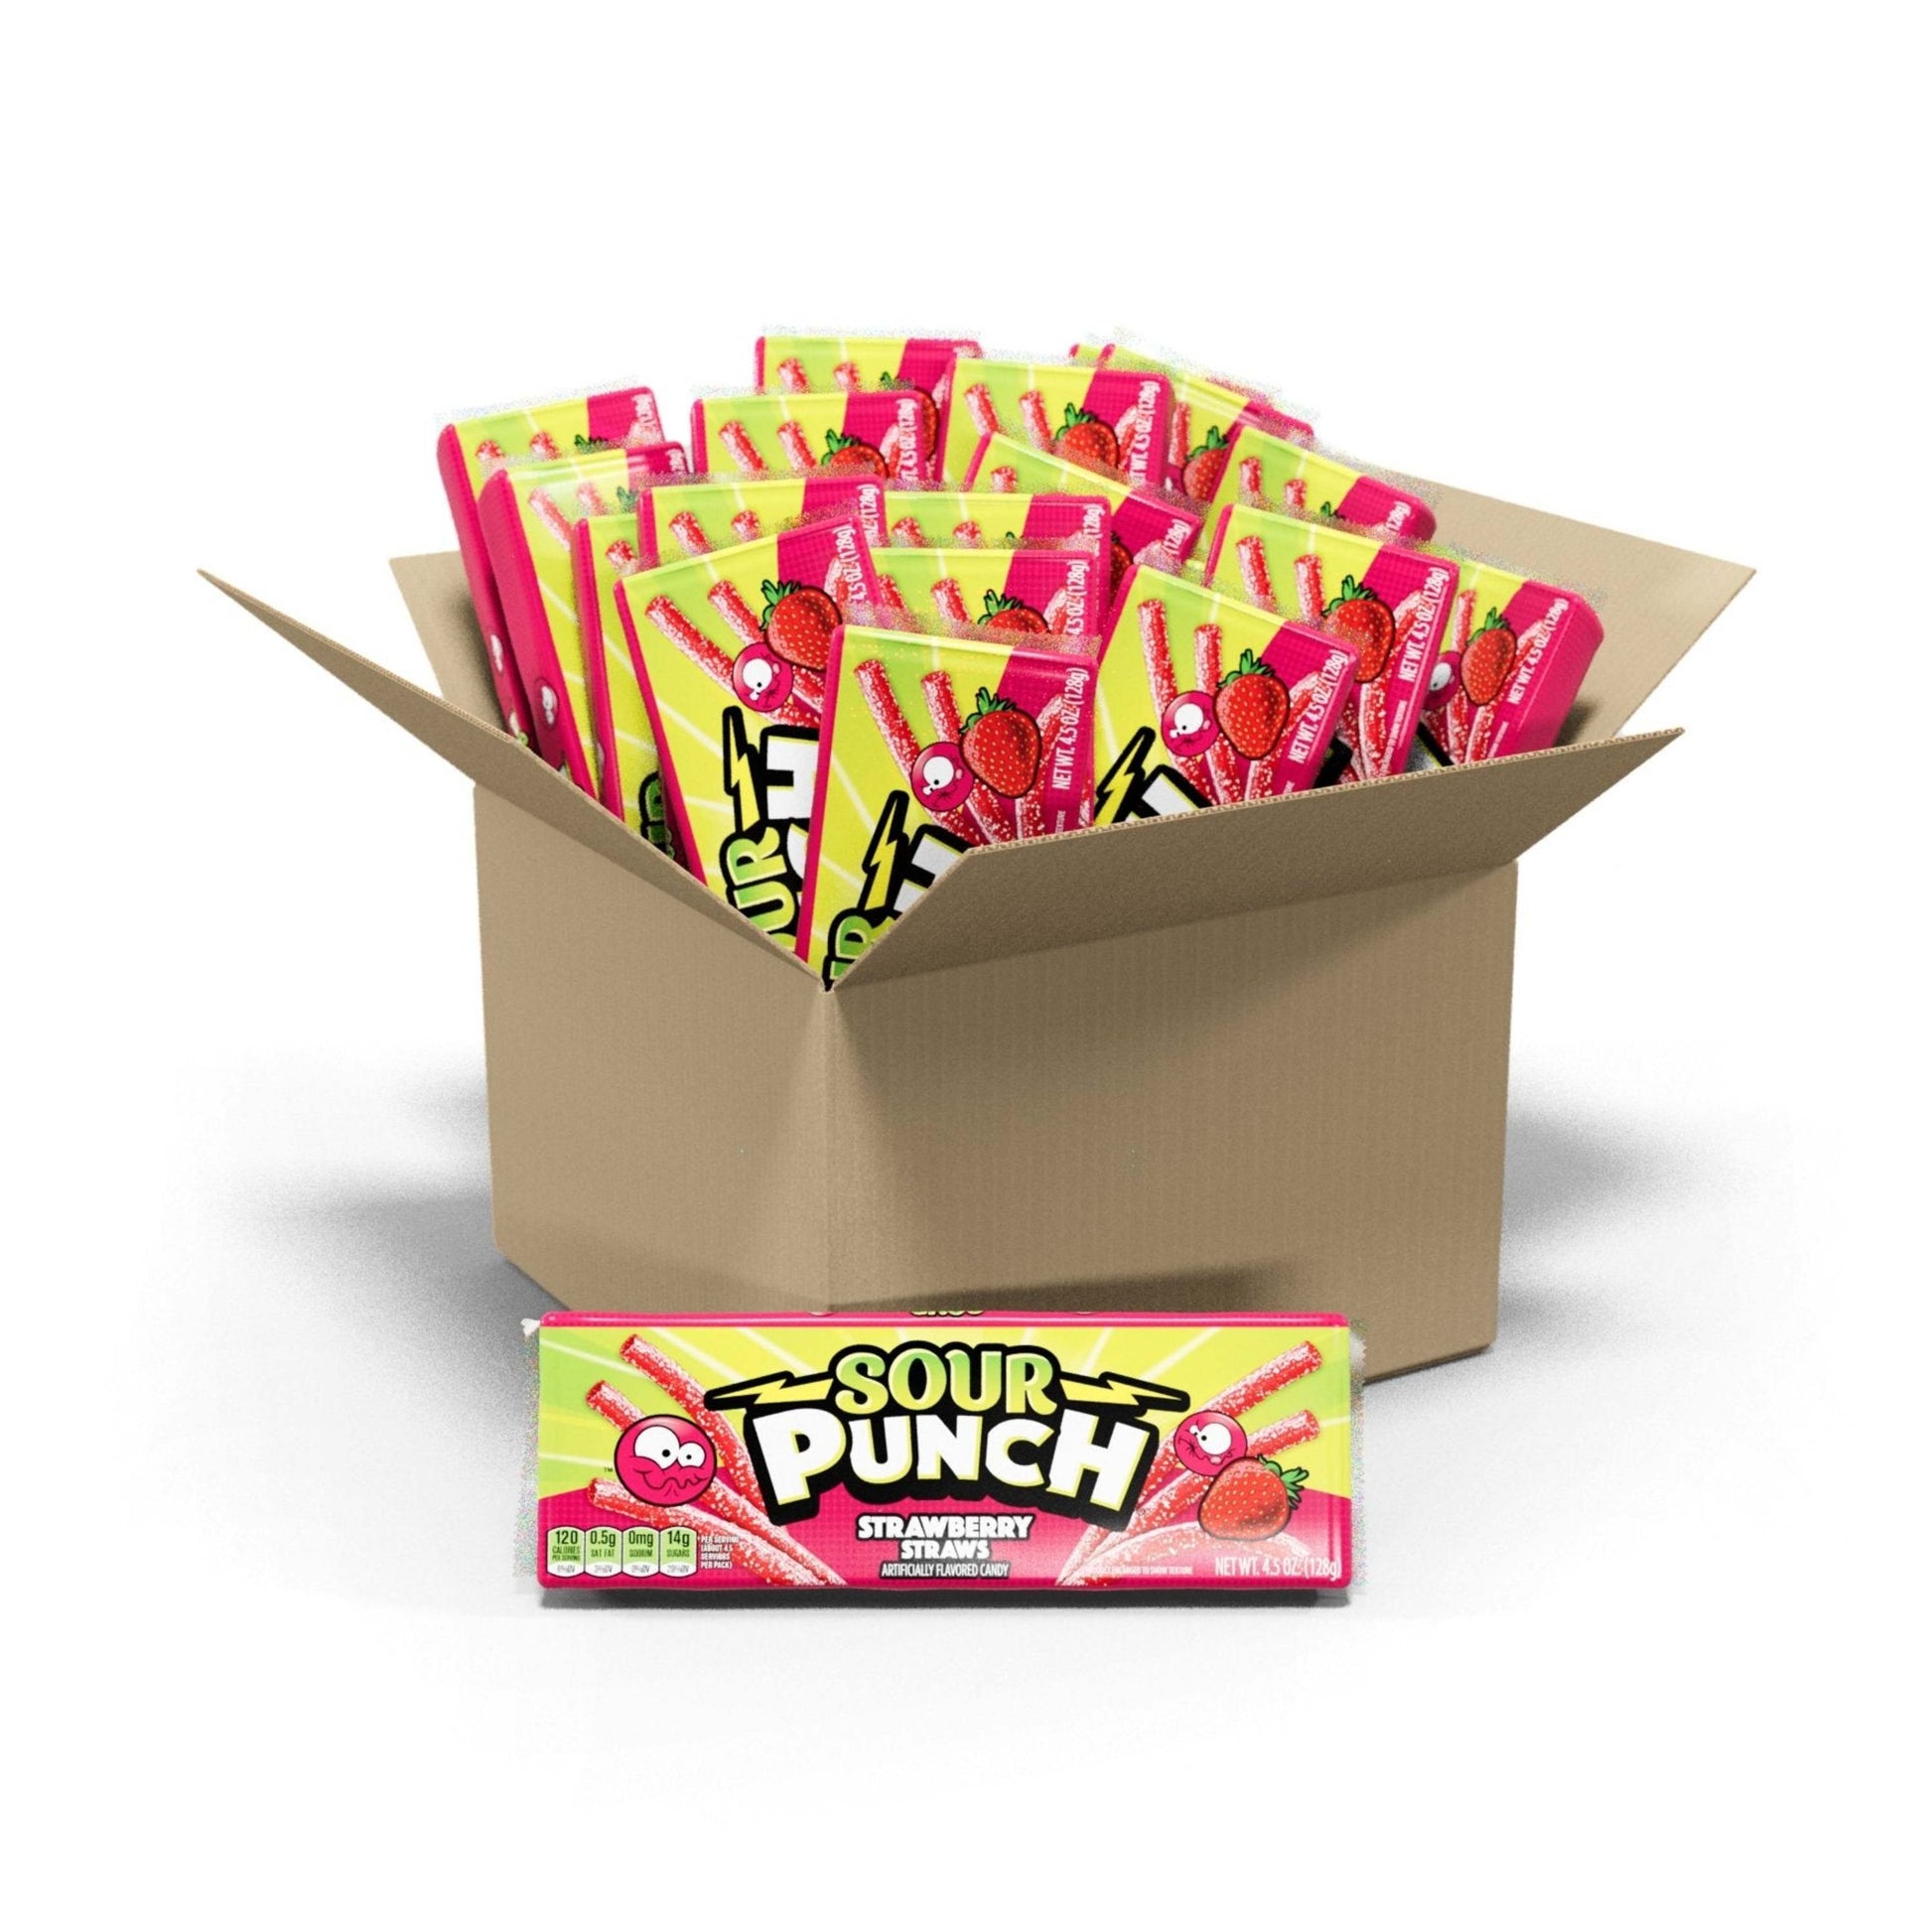 24 count box of Sour Punch Strawberry Straws 4.5oz Trays